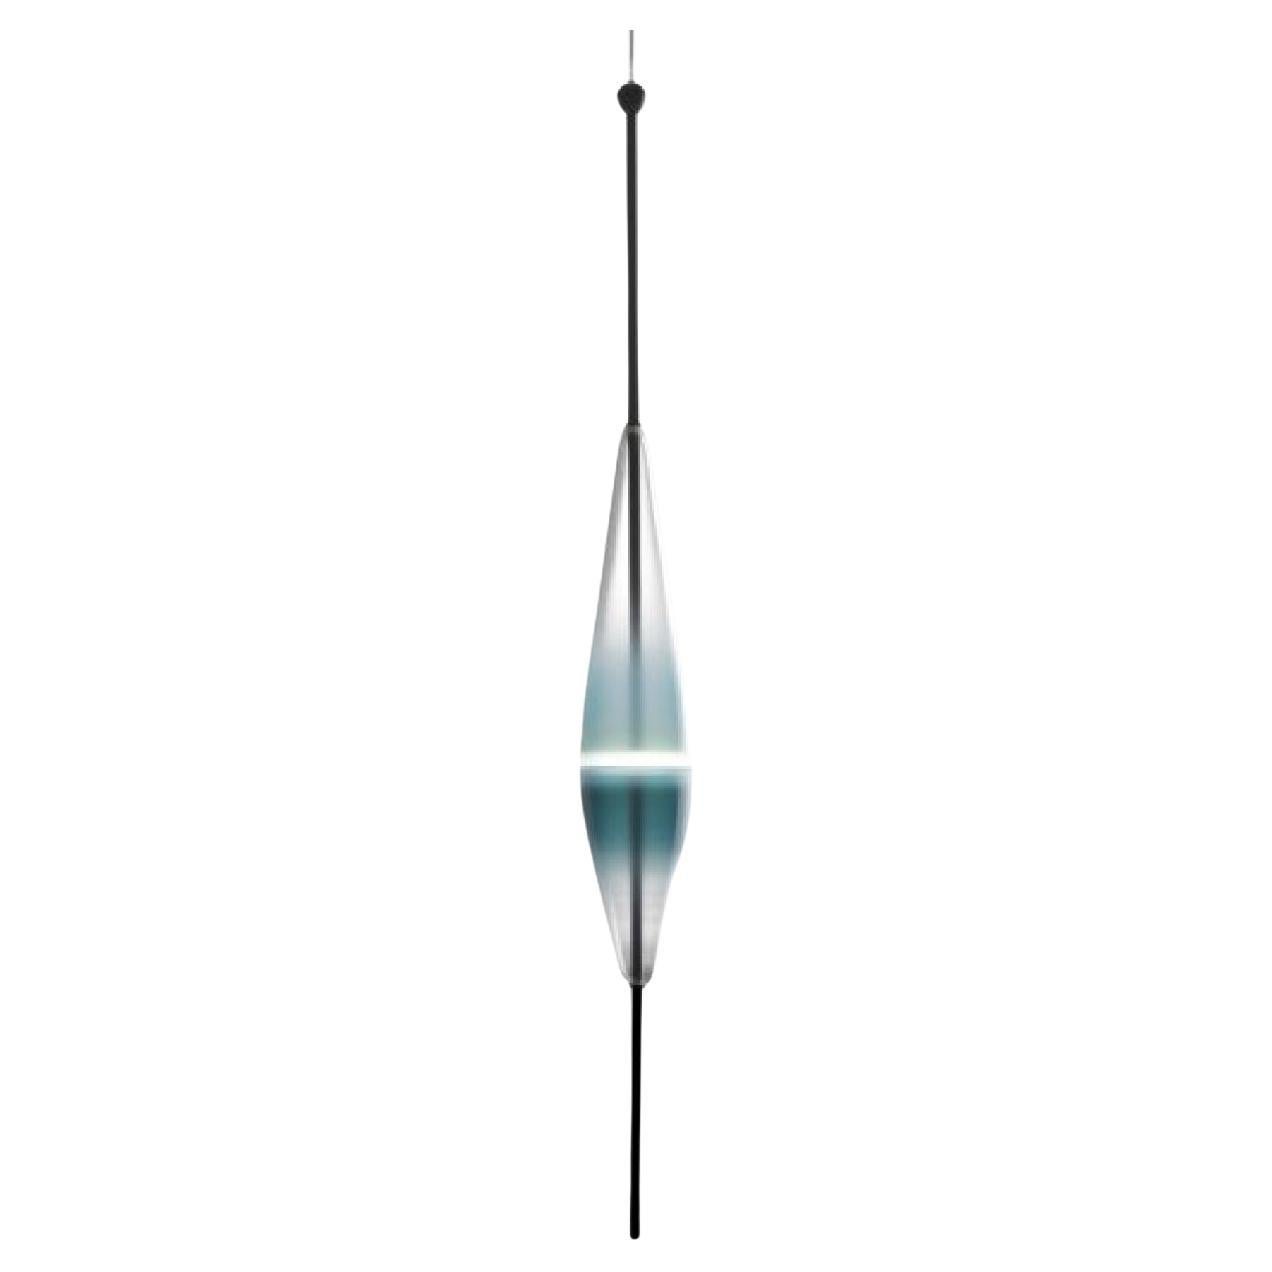 FLOW[T] S3 Pendant lamp in Turquoise by Nao Tamura for Wonderglass For Sale